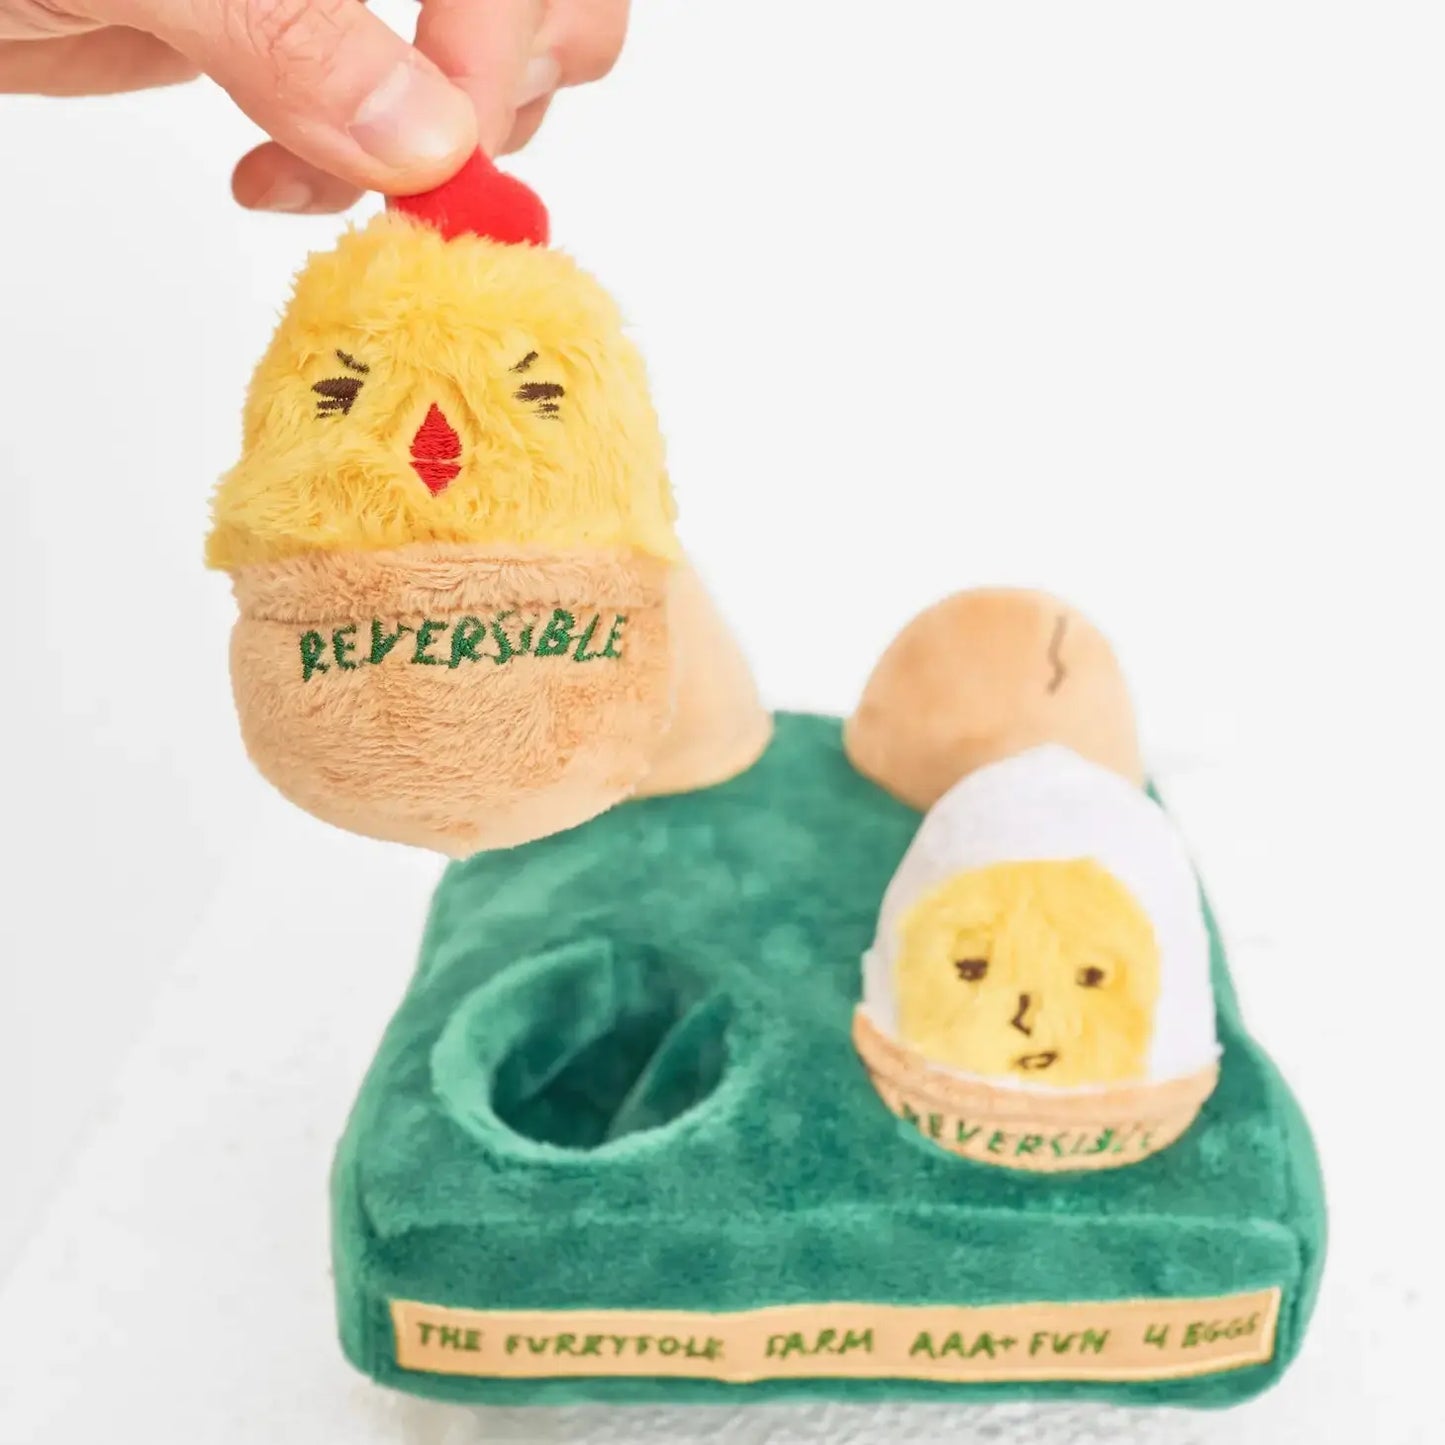 AAA+ Egg Nosework Toy THE FURRYFOLKS